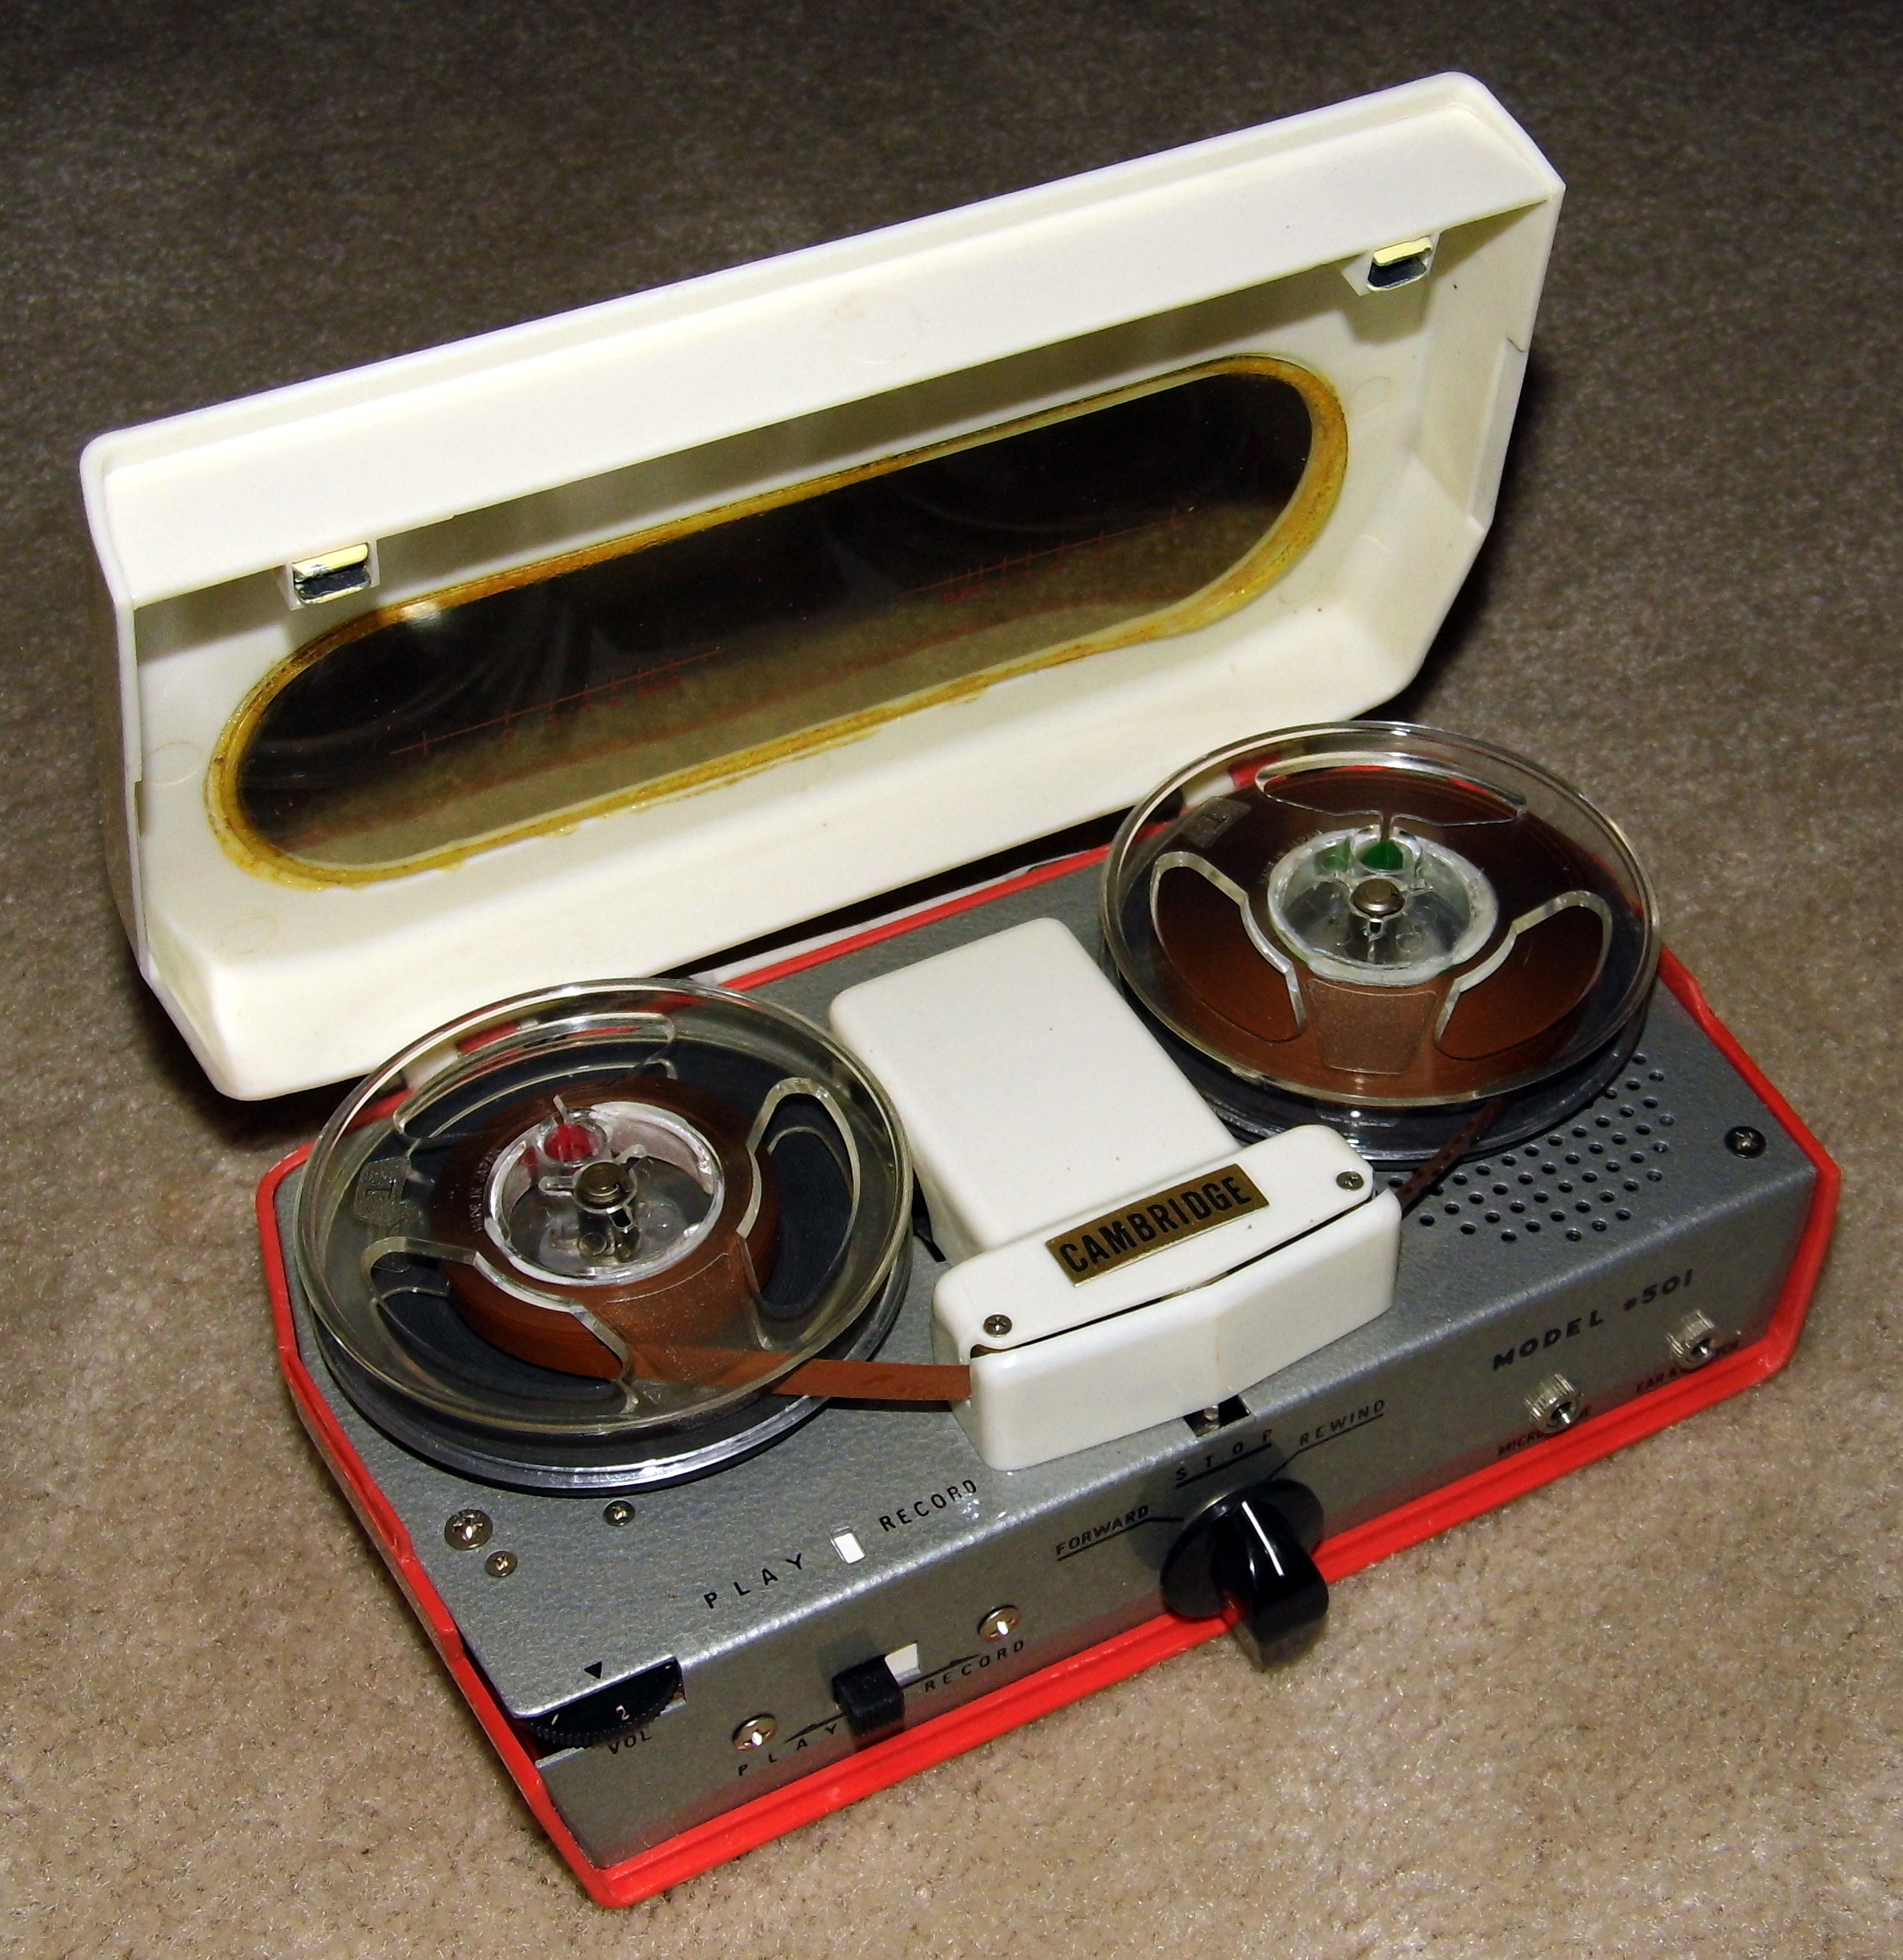 How do you find open-reel tape recorders?